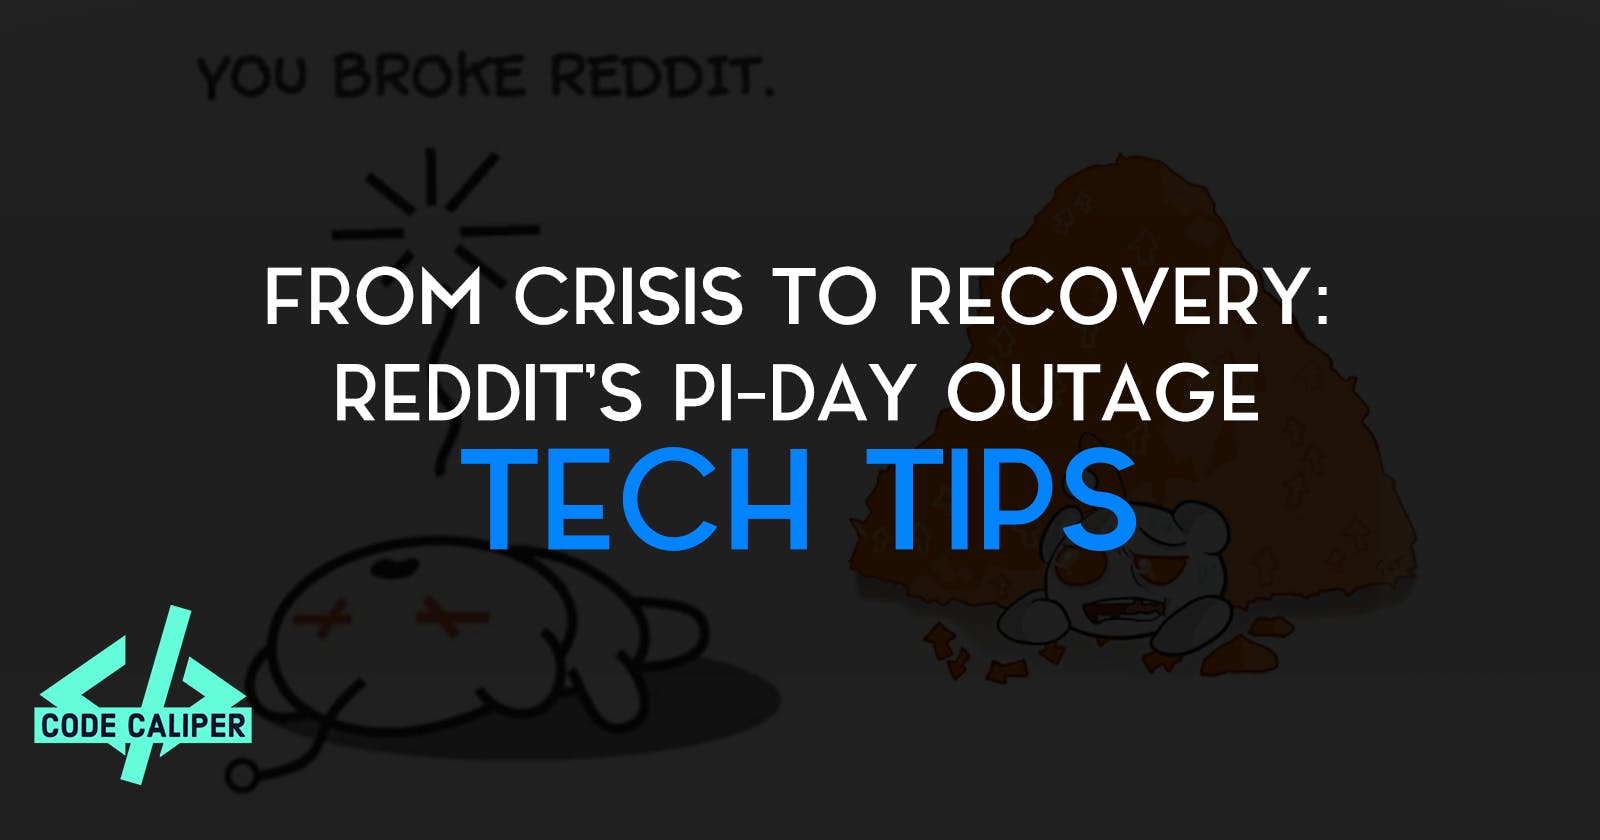 From Crisis to Recovery: Reddit's Pi-Day Outage and the Power of Effective Kubernetes Management